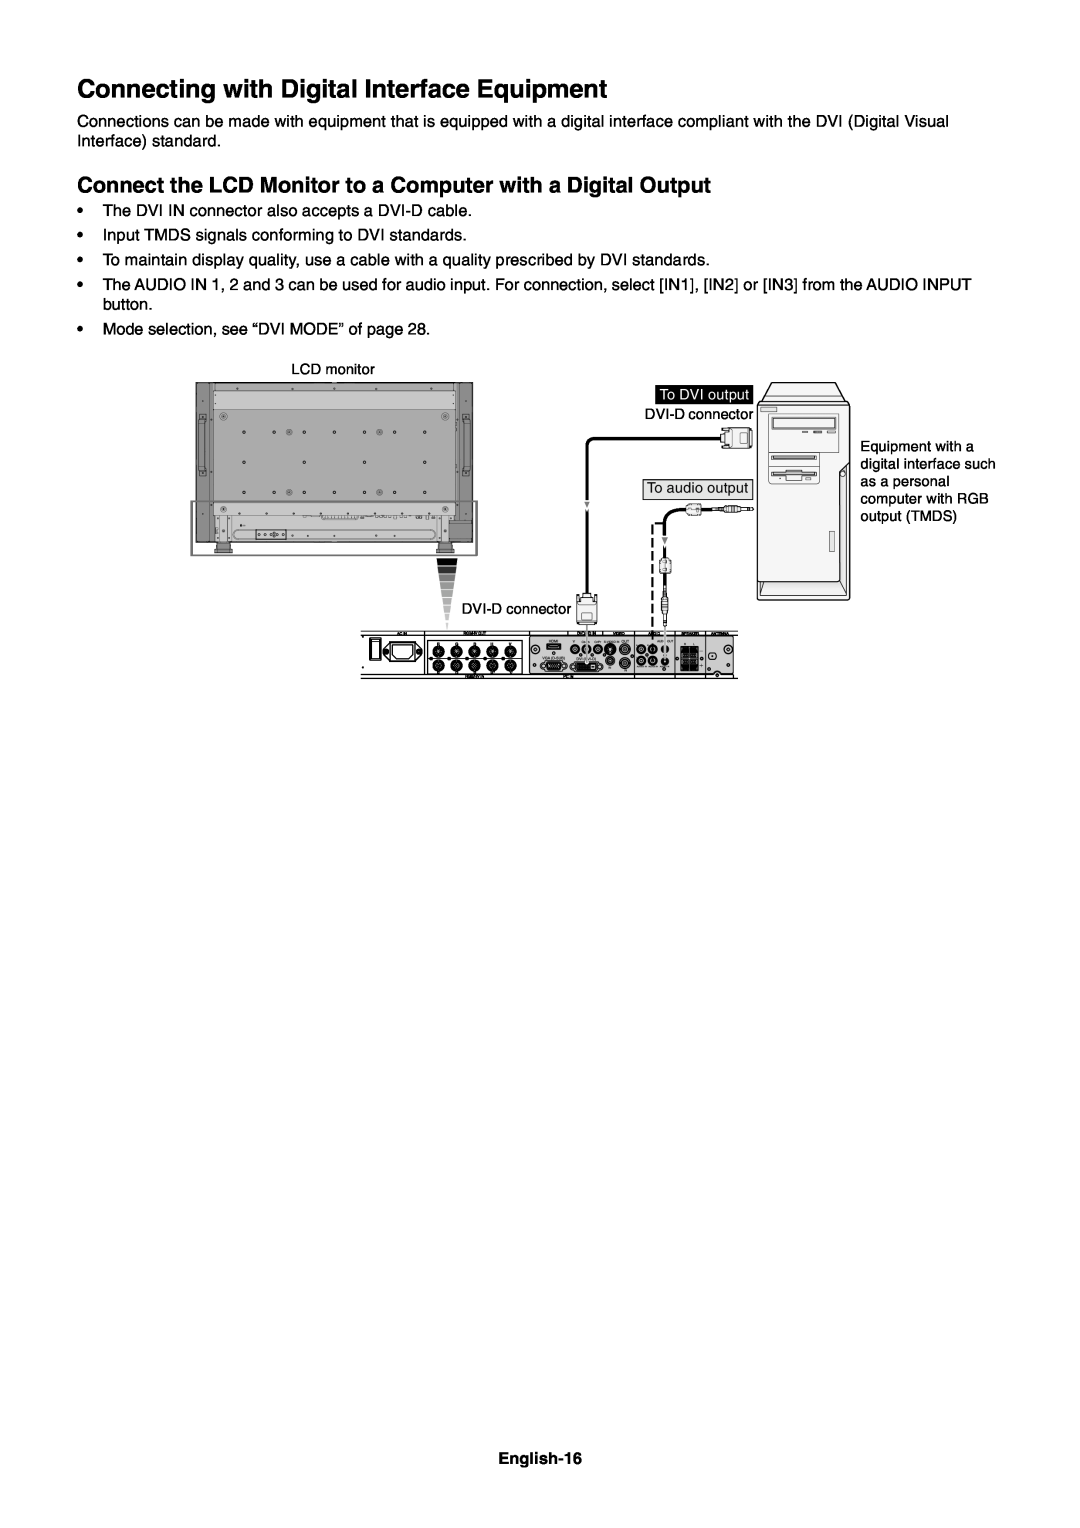 NEC LCD4020, LCD4620 user manual Connecting with Digital Interface Equipment, English-16 